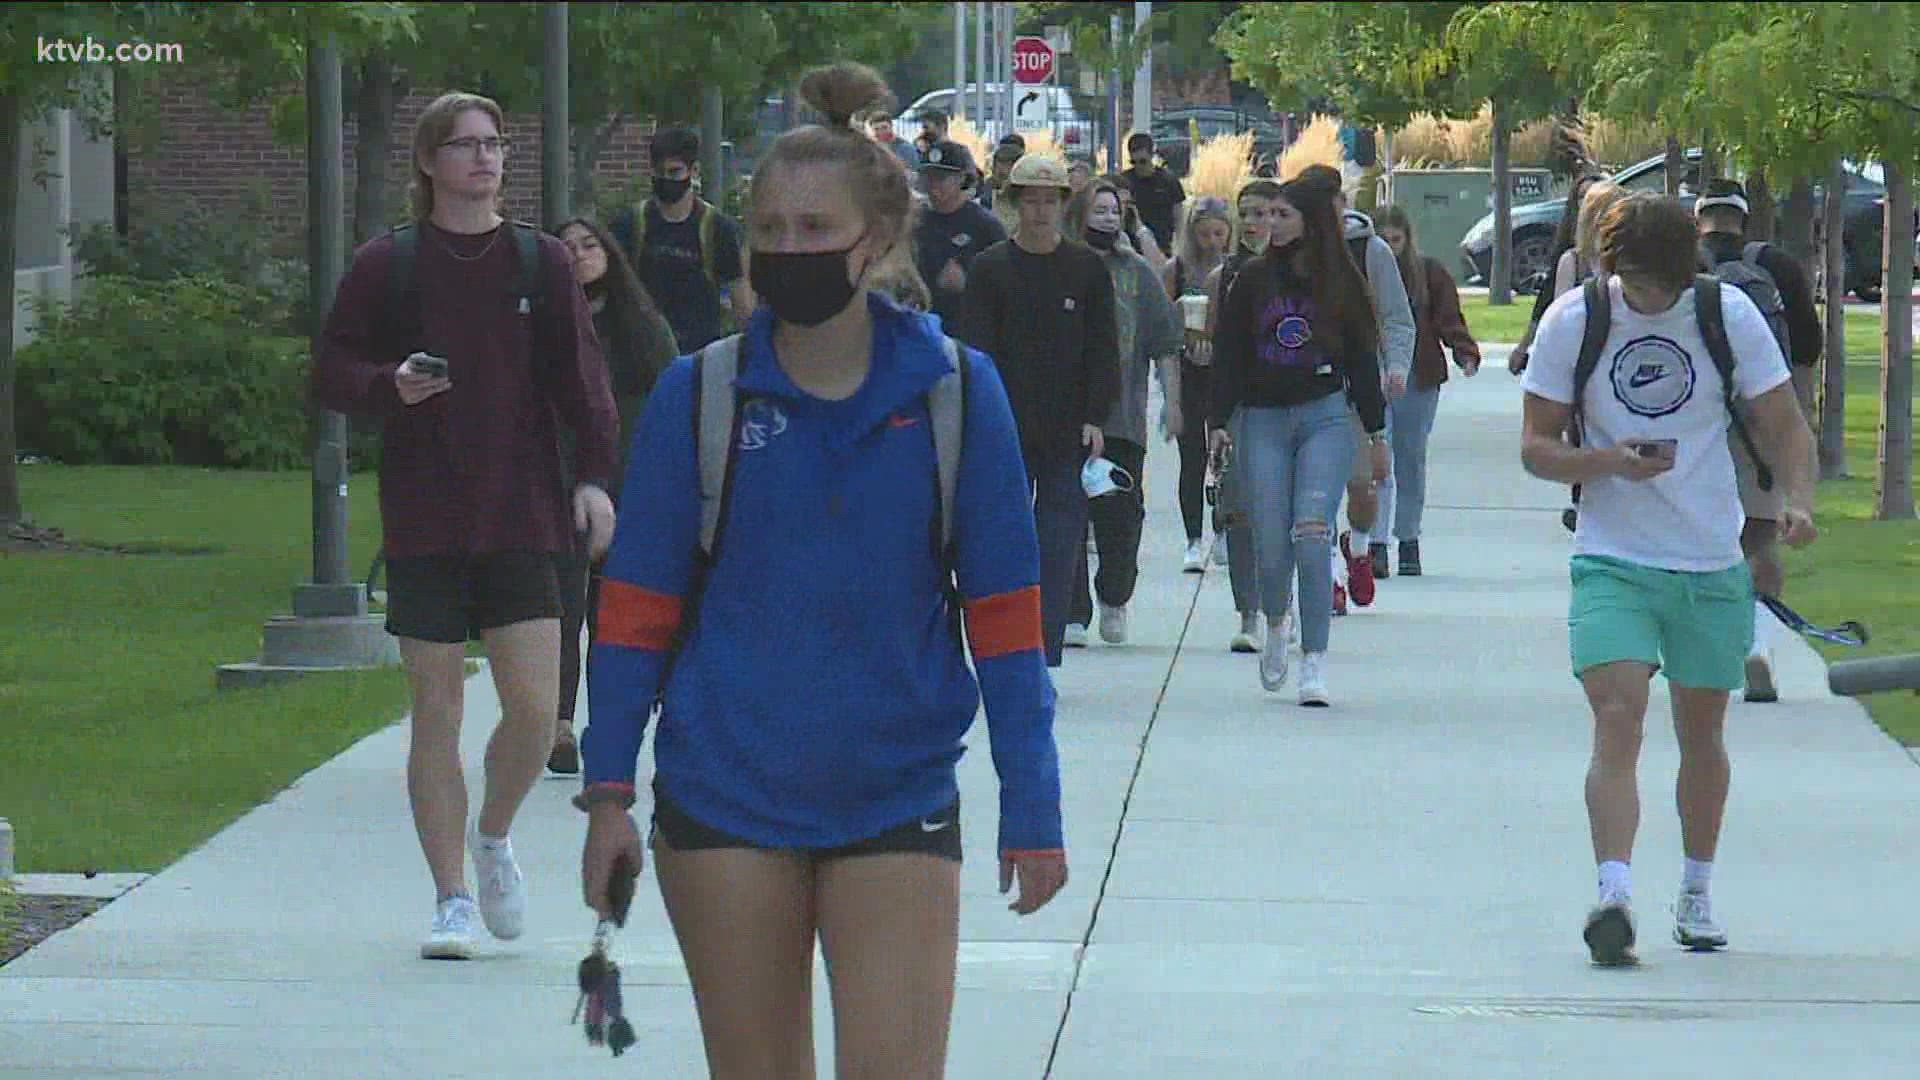 The university’s VP of University Affairs said if conditions continue to improve, the classroom and lab mask requirement may be lifted before the end of March.